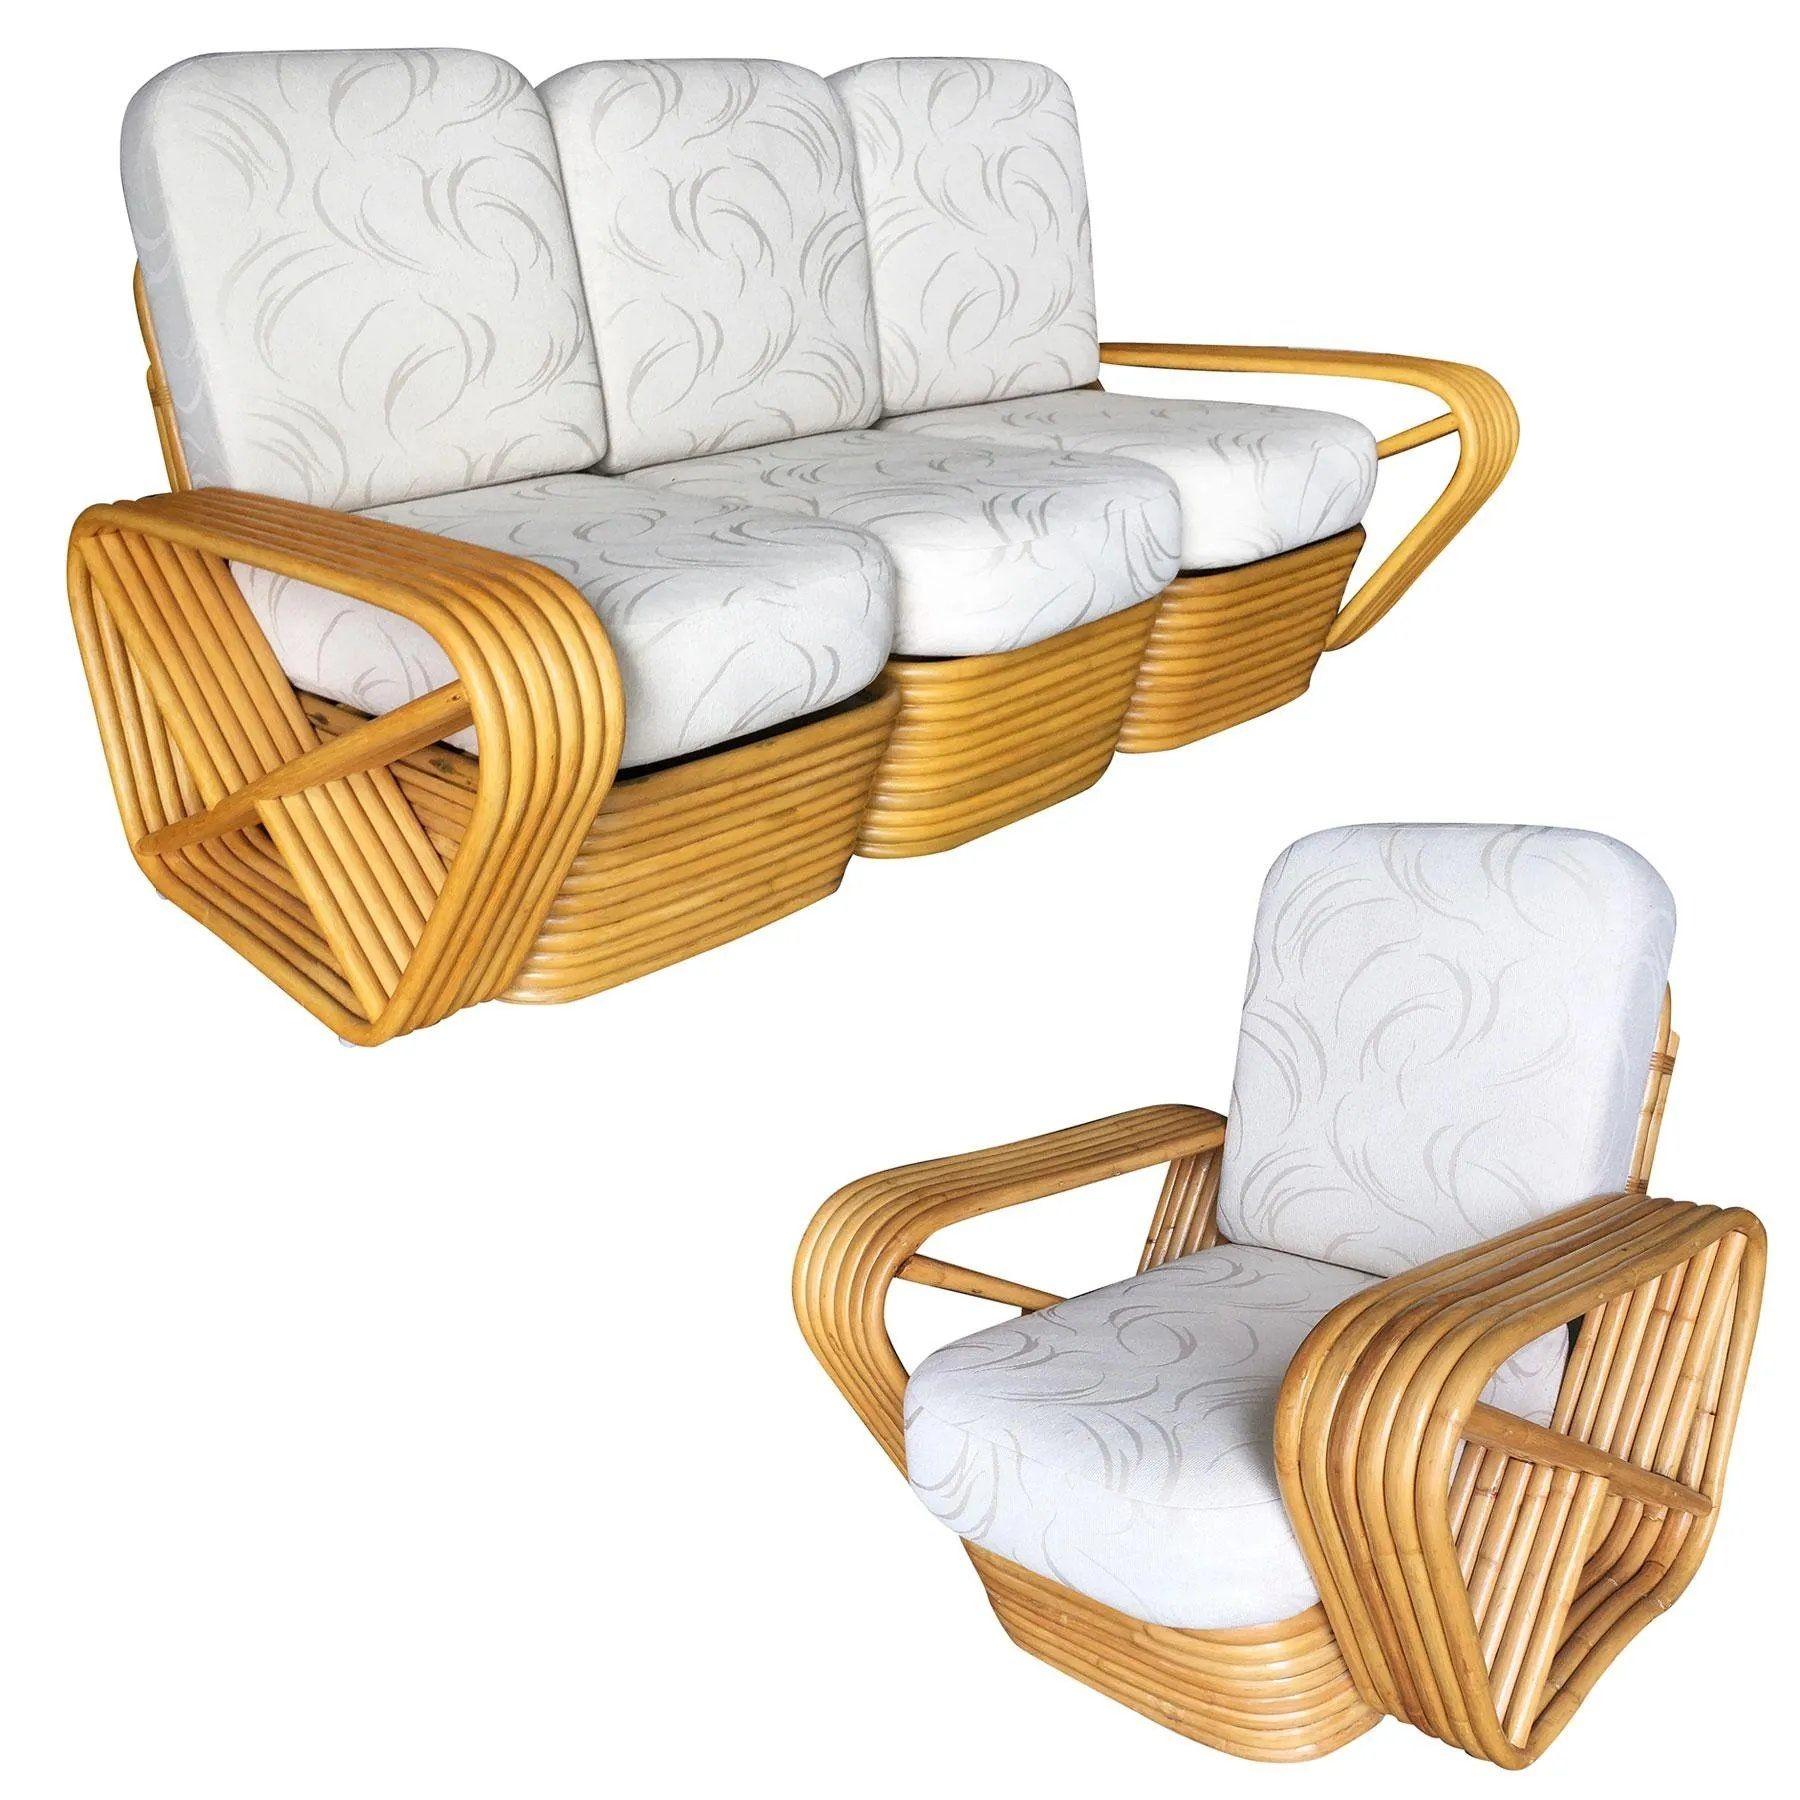 Art Deco Rattan living-room set including a matching sectional sofa and lounge chair. Both feature the famous six-strand square pretzel side arms and stacked rattan base originally designed by Paul Frankl. The seats are covered in white bark cloth